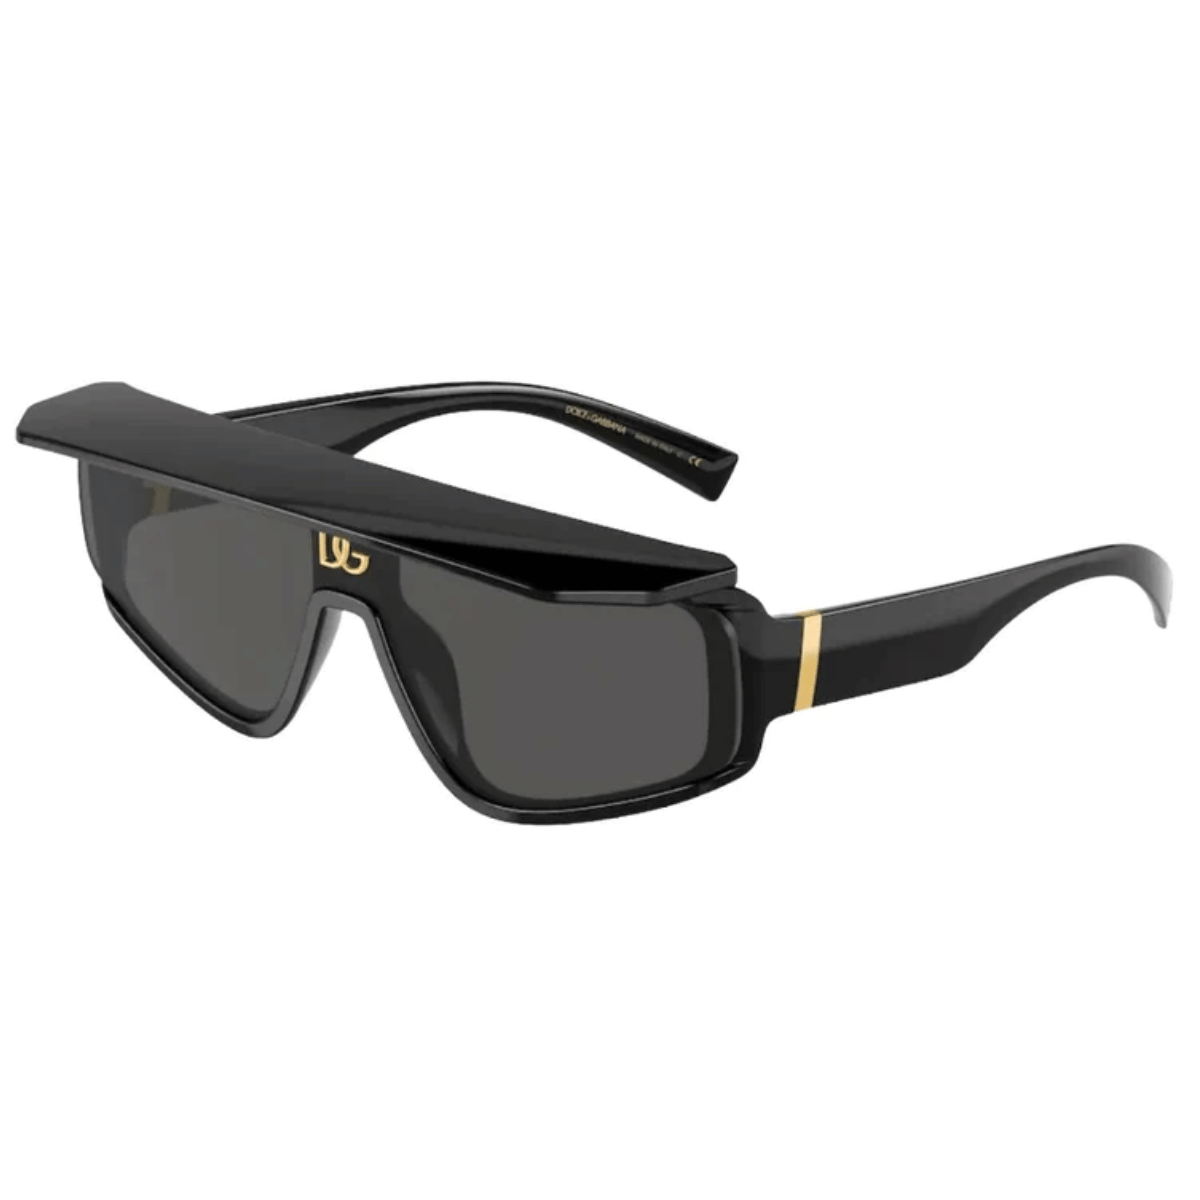 3. "Enhance your look with Dolce & Gabbana DG6177 501/87 Sunglasses in Black for men from Optorium. Stay stylish and comfortable with these branded shades, ideal for any occasion."